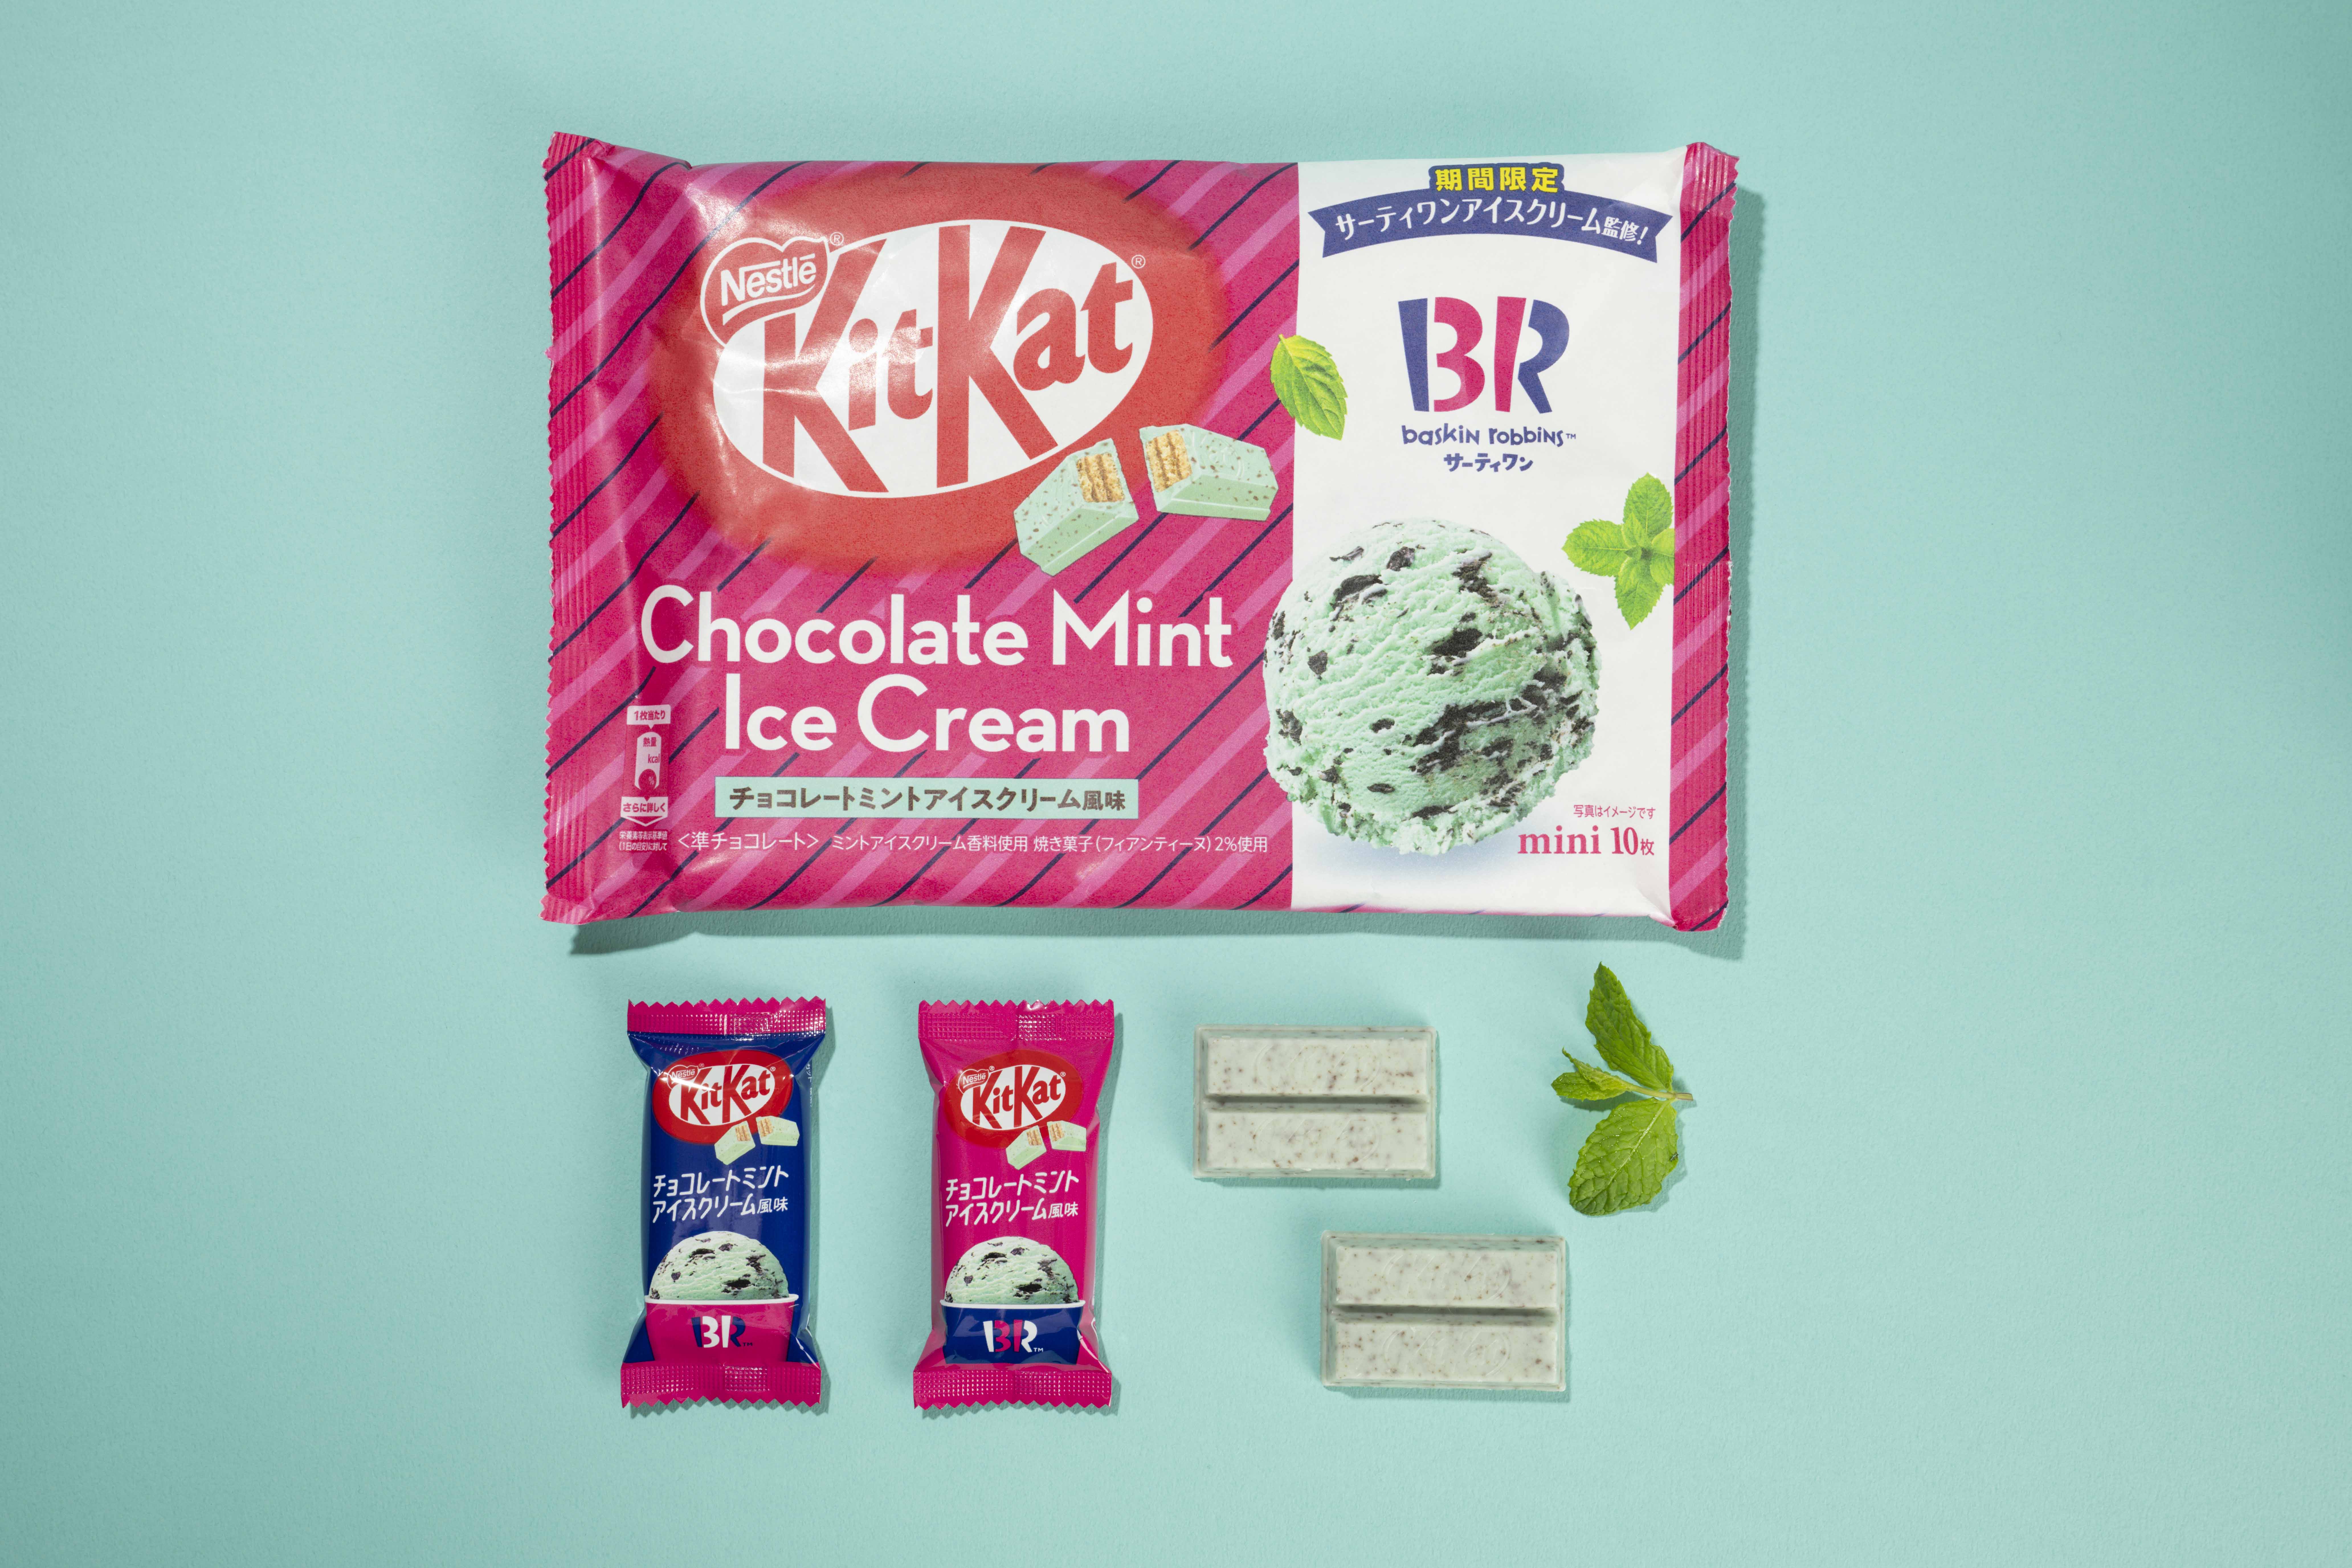 New Japanese KitKat captures the flavour of Baskin Robbins' choc